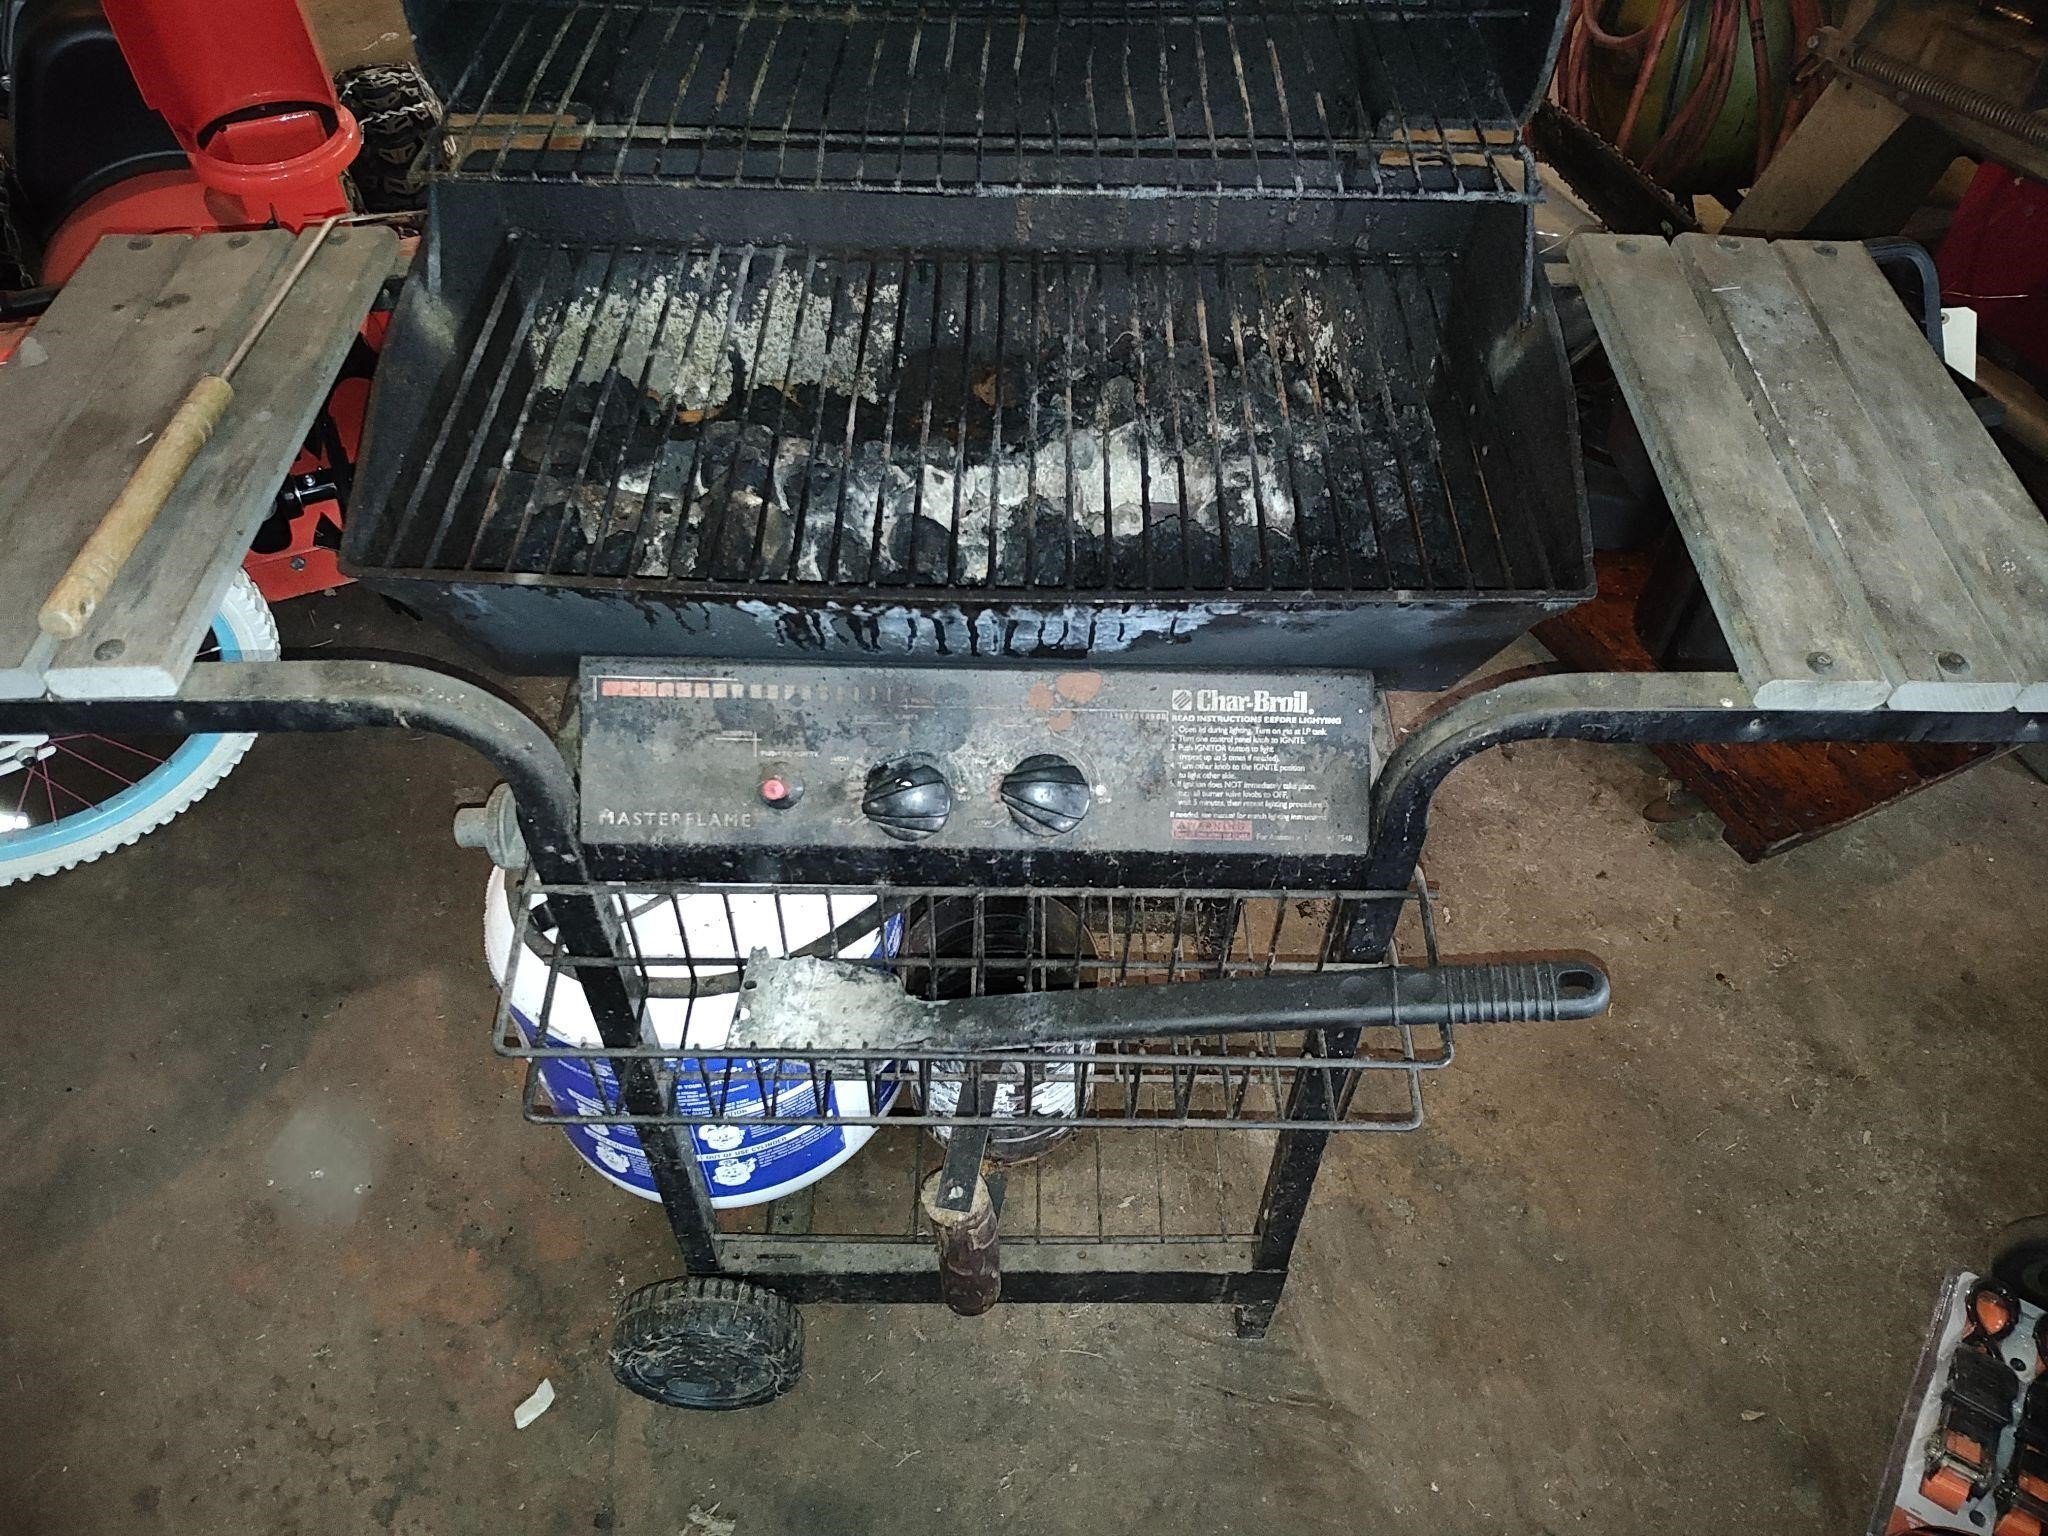 Propane grill with tank,chairs, step ladder